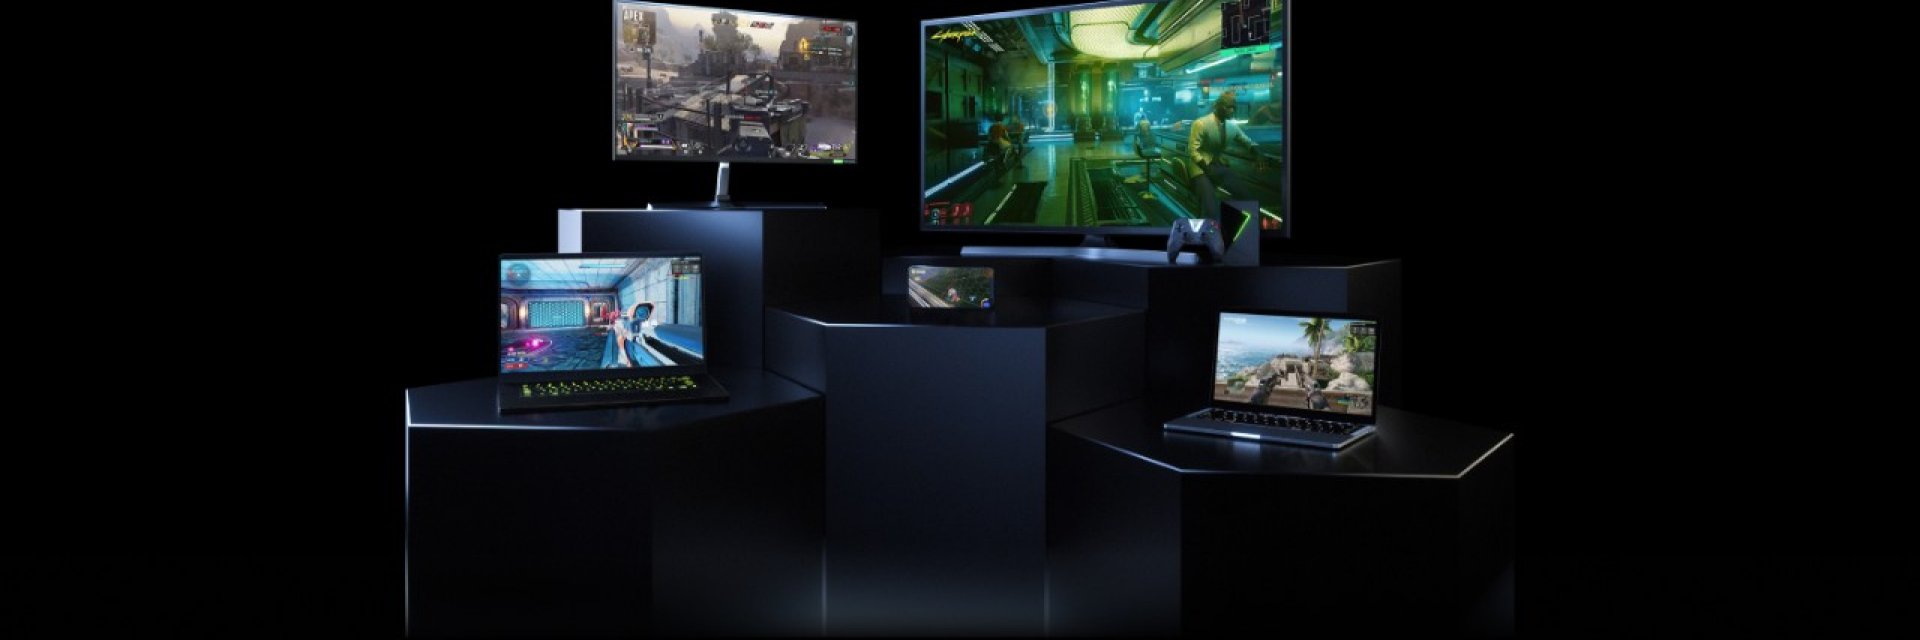 GeForce NOW, The Next Generation in Cloud Gaming